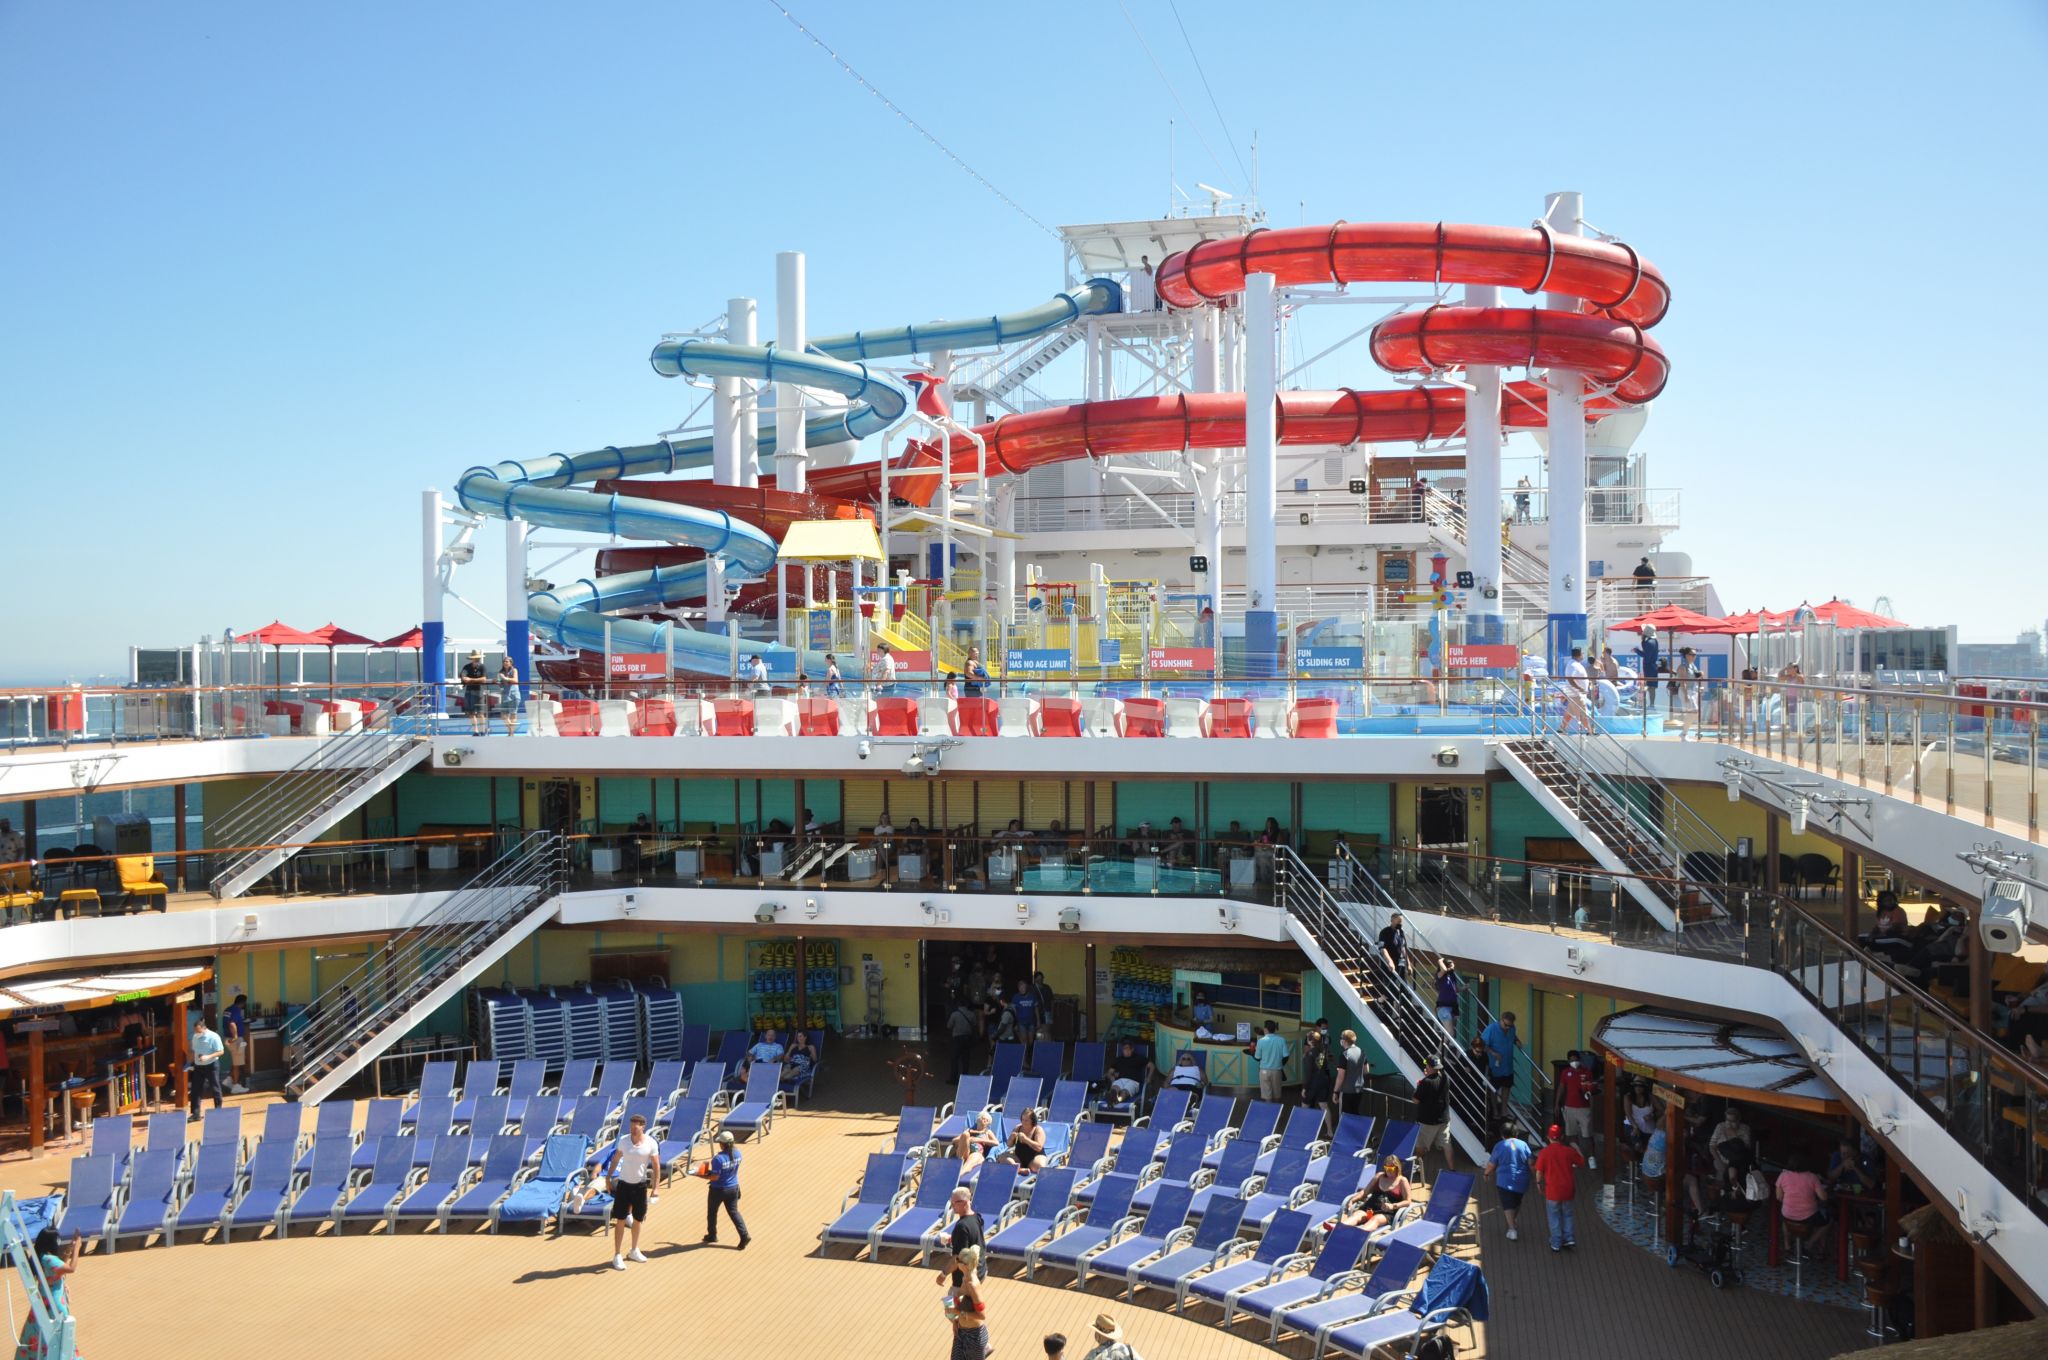 carnival cruise western mexico